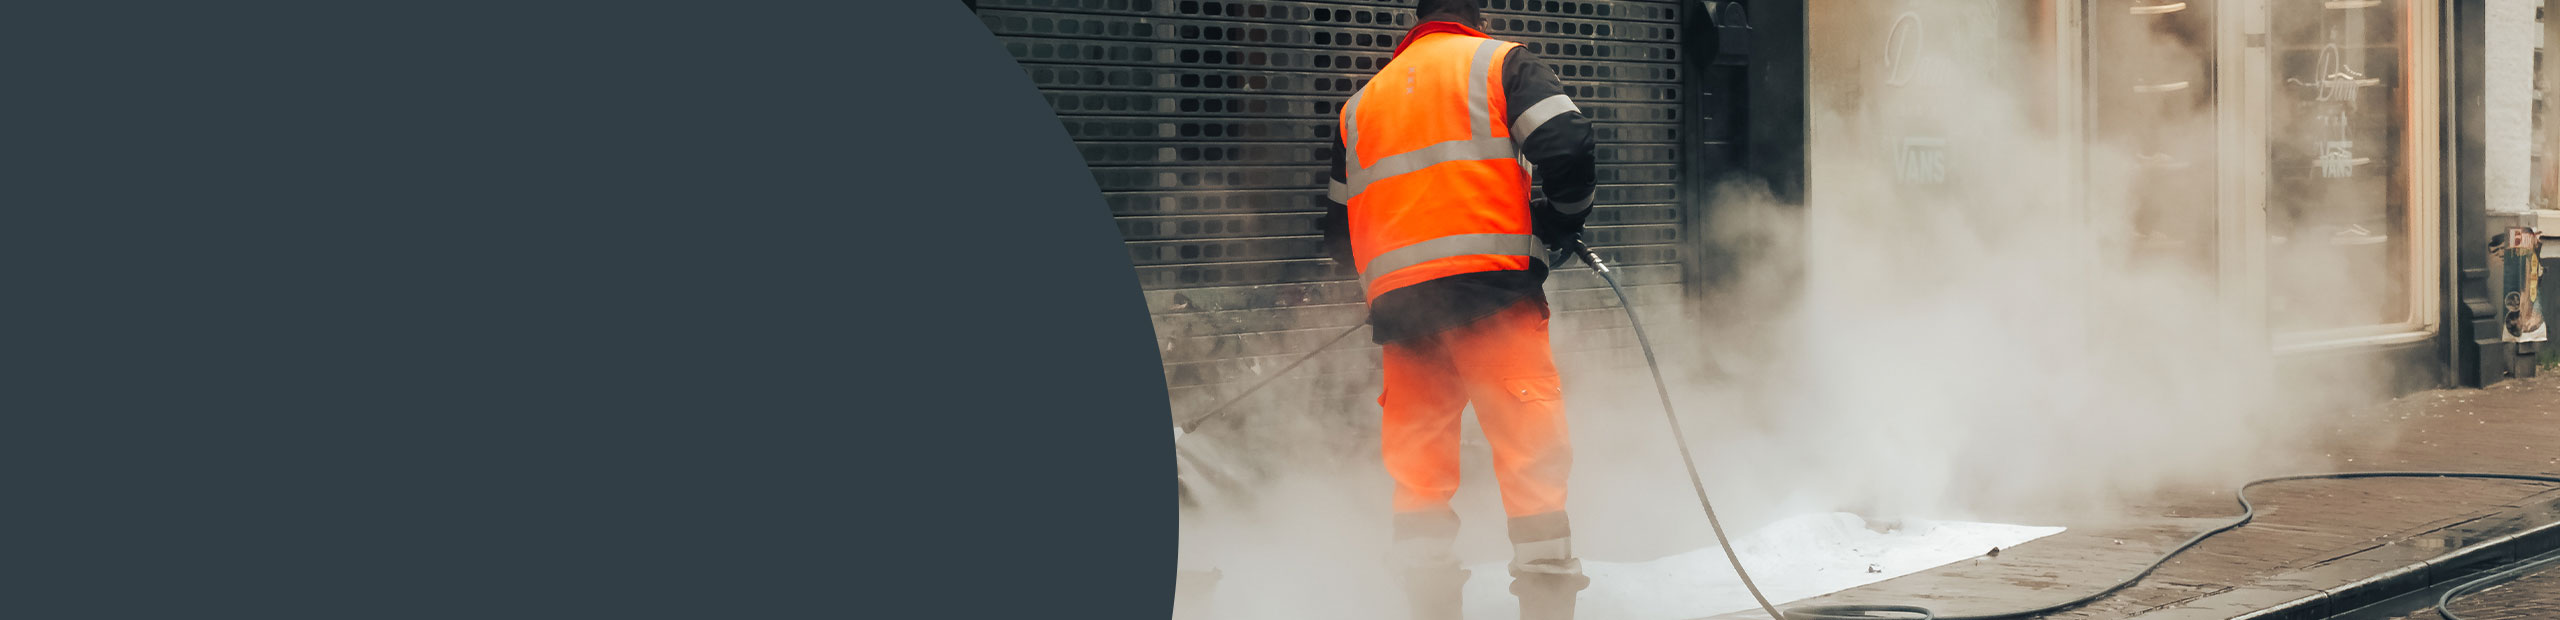 Graffiti Removal Specialists - Hammersmith & Fulham